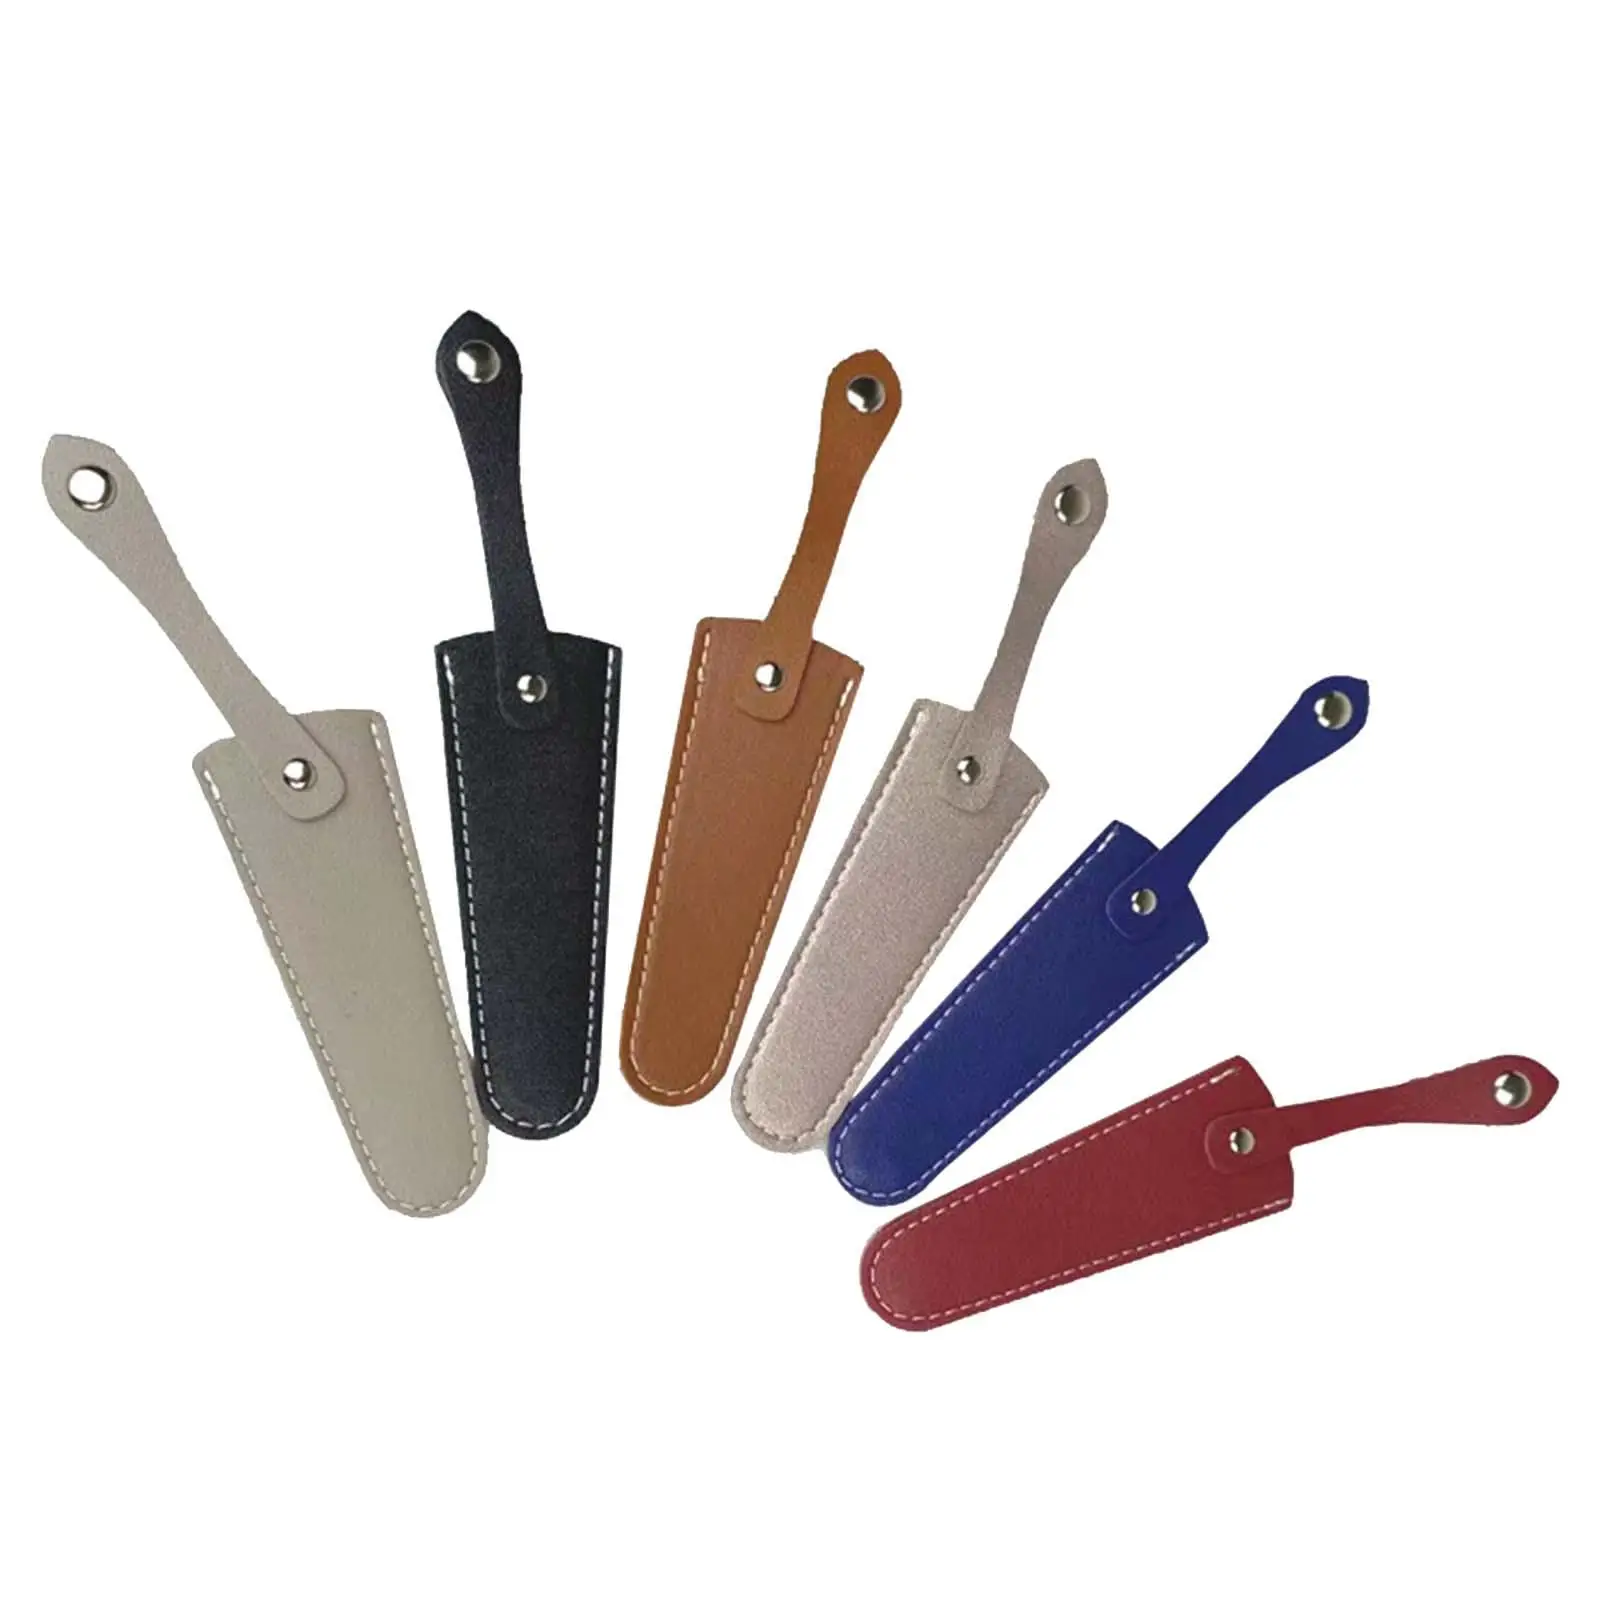 6Pcs Scissors Sheath PU Leather Collect Bags Compact Scissors Cover Protector for Embroidery Hair Cutting Scissors Hairdressers